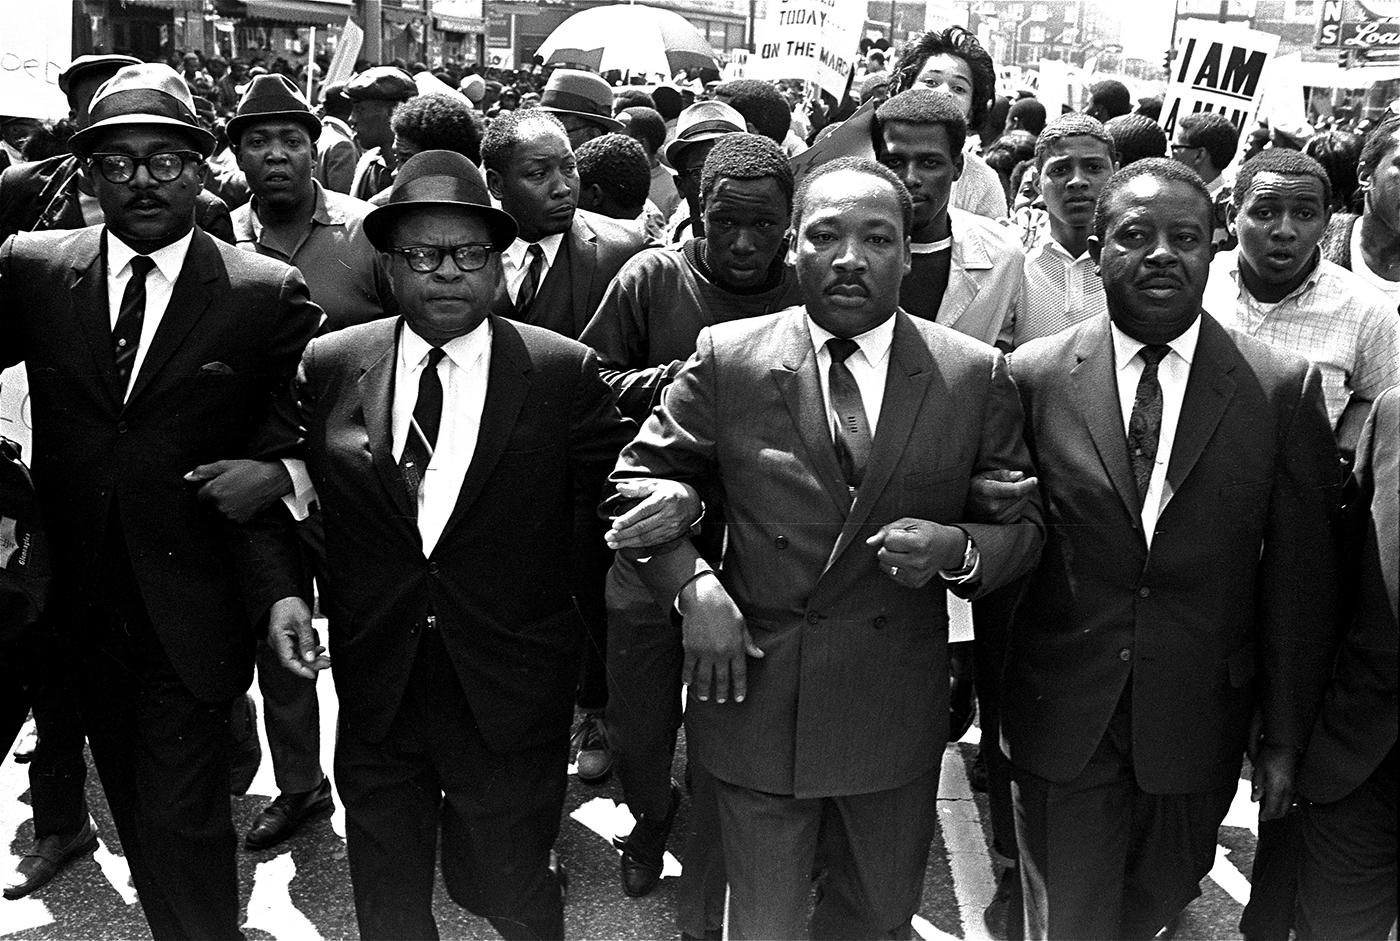 The Rev. Ralph Abernathy, right, and Bishop Julian Smith, left, flank Dr. Martin Luther King, Jr., during a civil rights march in Memphis, Tenn., March 28, 1968. AP Photo/Jack Thornell